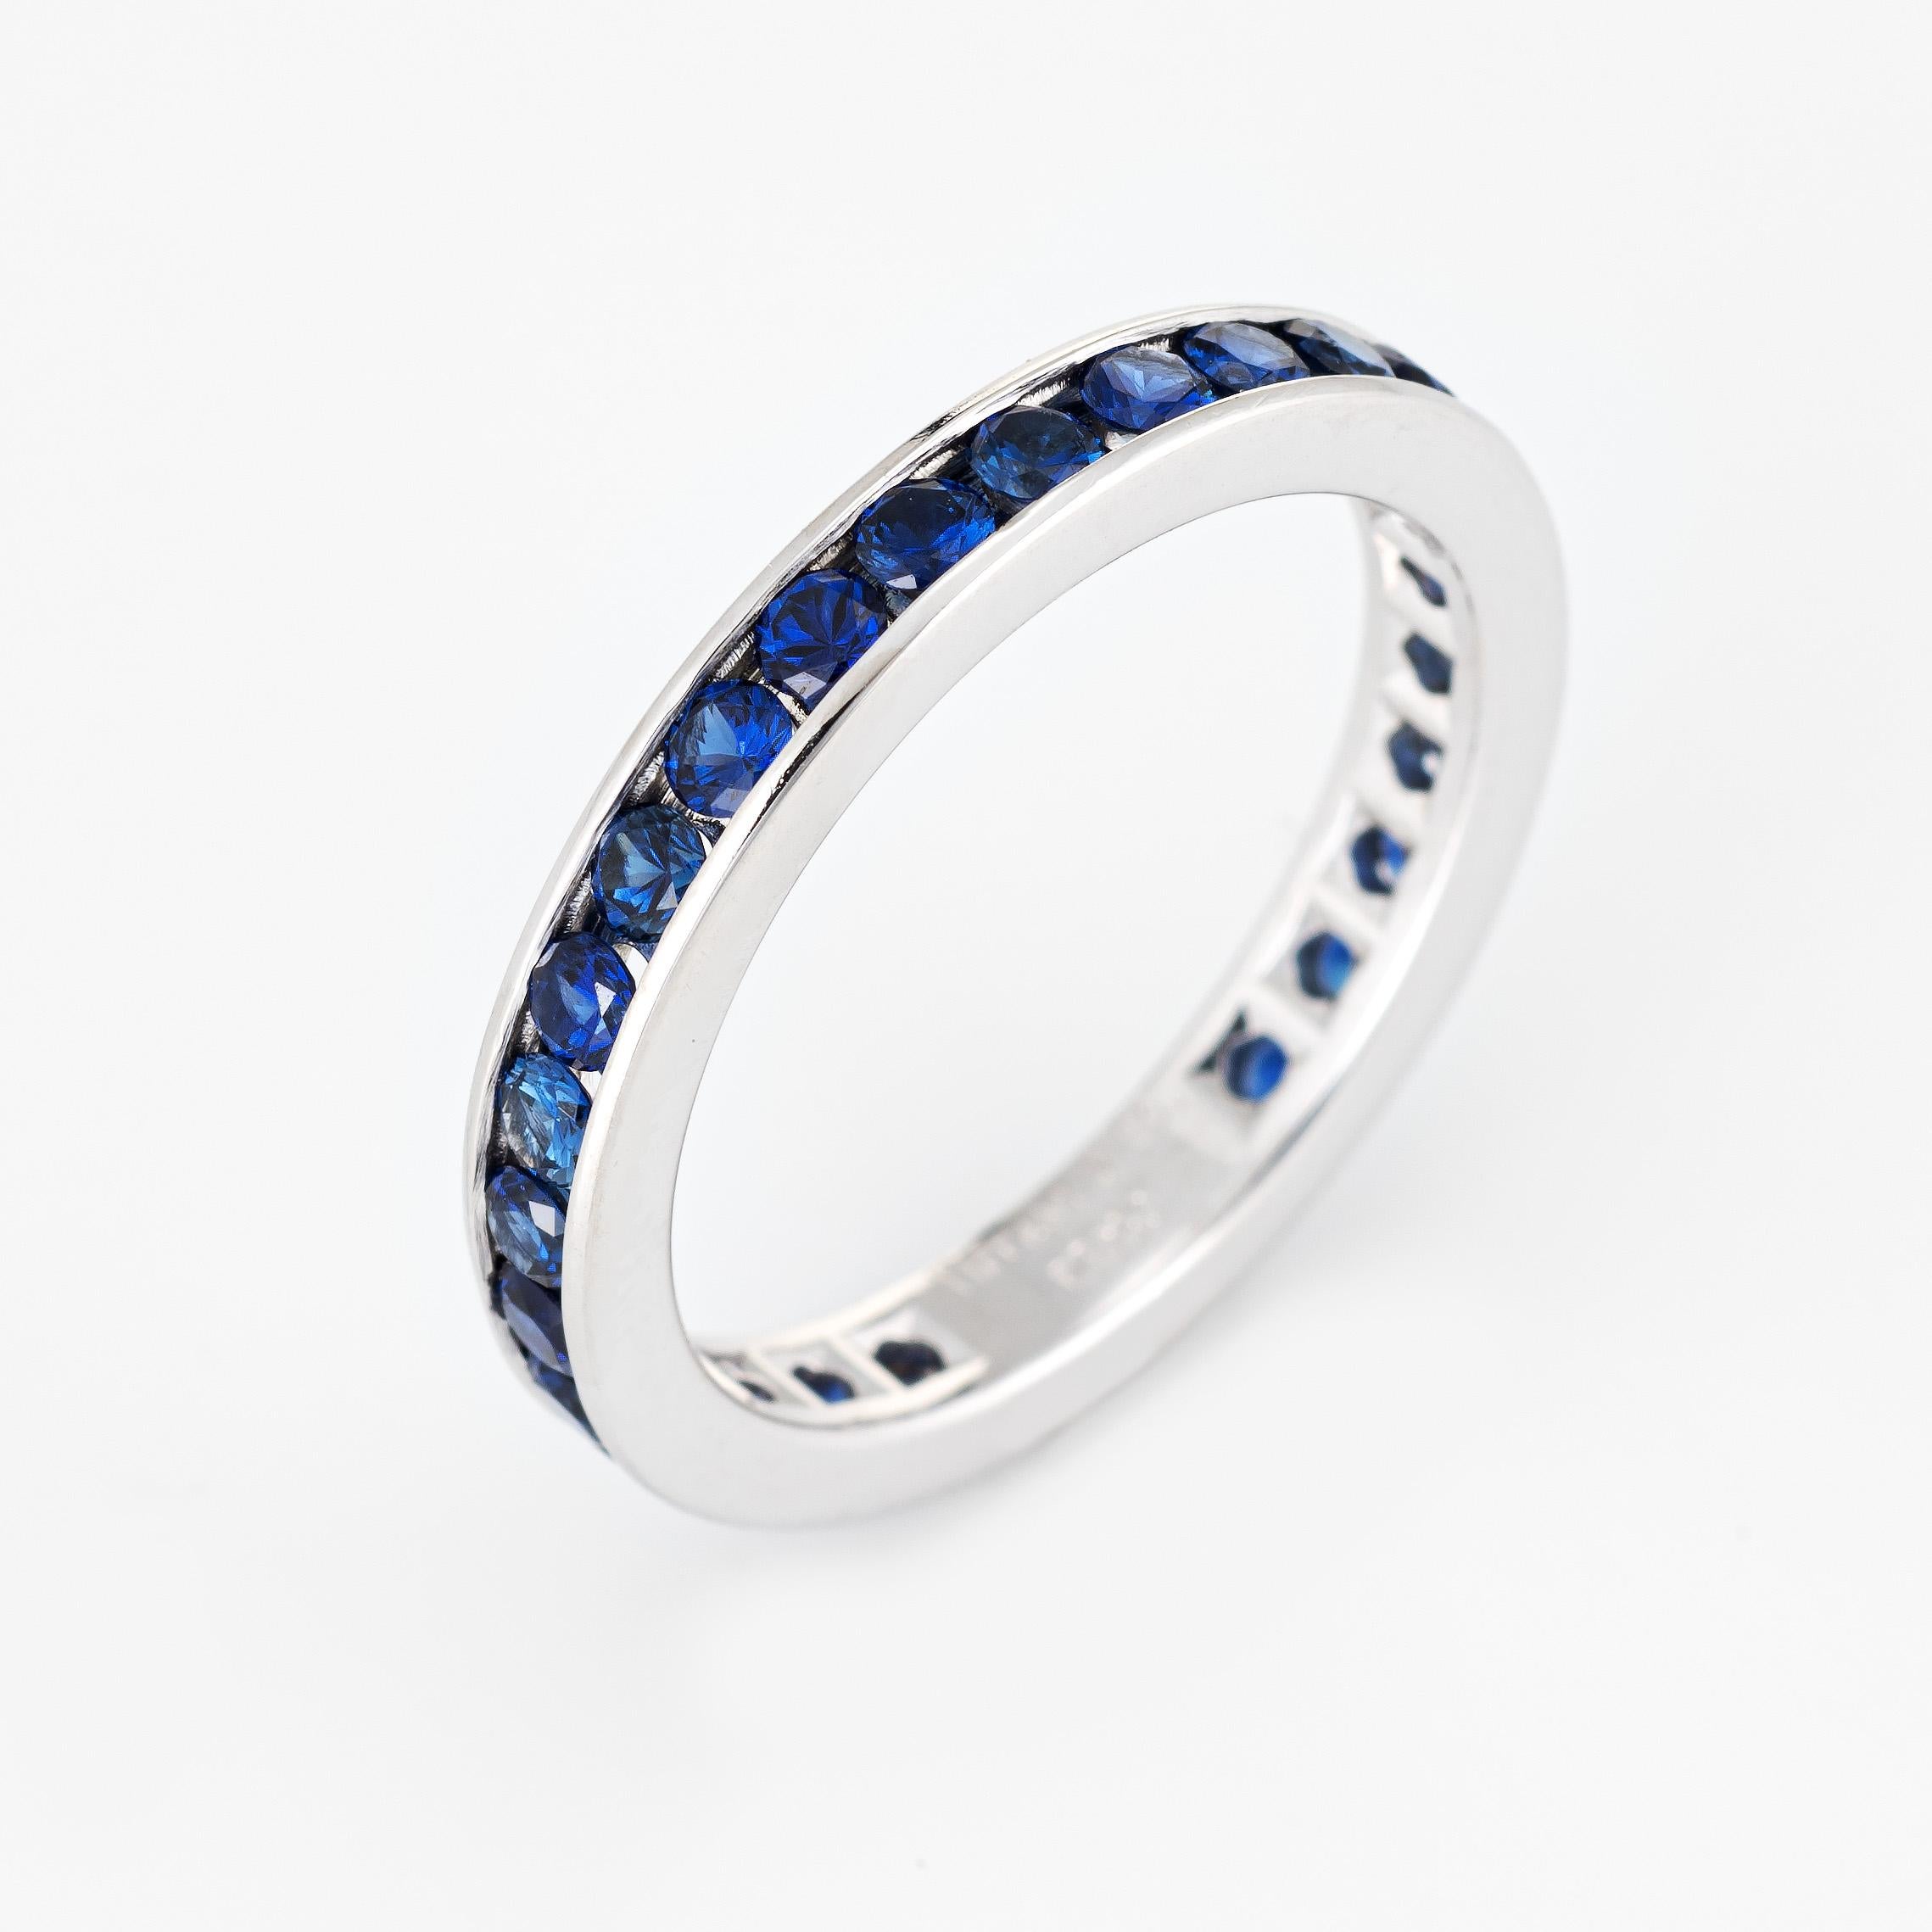 Pre owned Tiffany & Co sapphire eternity band crafted in 950 platinum.  

22 round cut blue sapphires are estimated at 0.05 carats each. The total sapphire weight is estimated at 1.10 carats. The sapphires are in excellent condition and free of